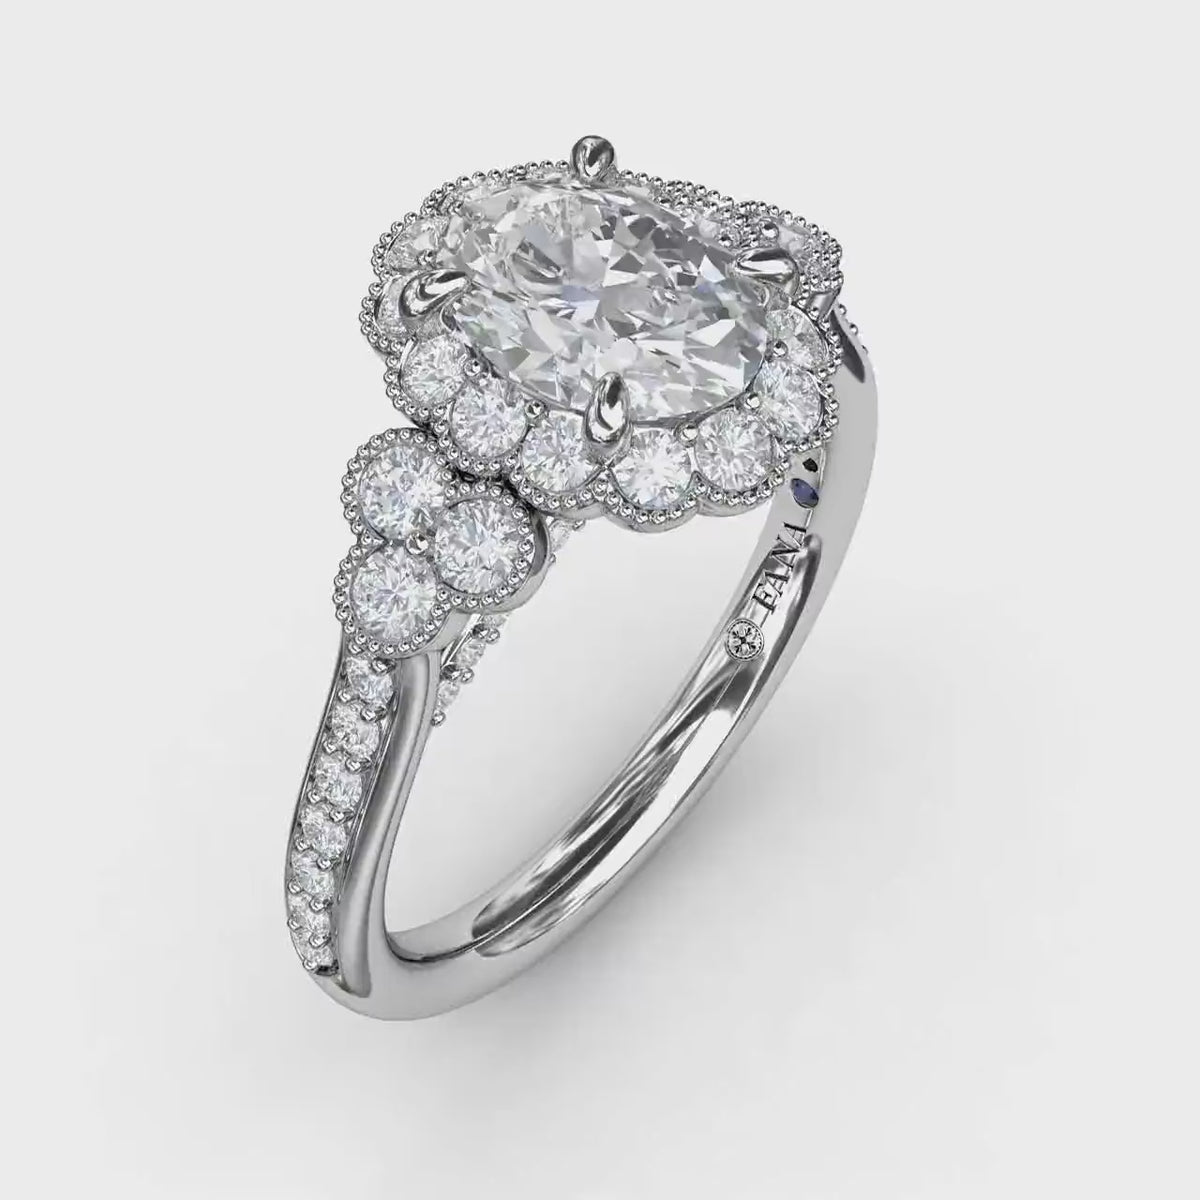 Fana - Scalloped Halo Engagement Ring With Diamond Clusters and Milgrain Details - S3205 - Available in 14K & 18K Gold (White, Yellow or Rose) and Platinum